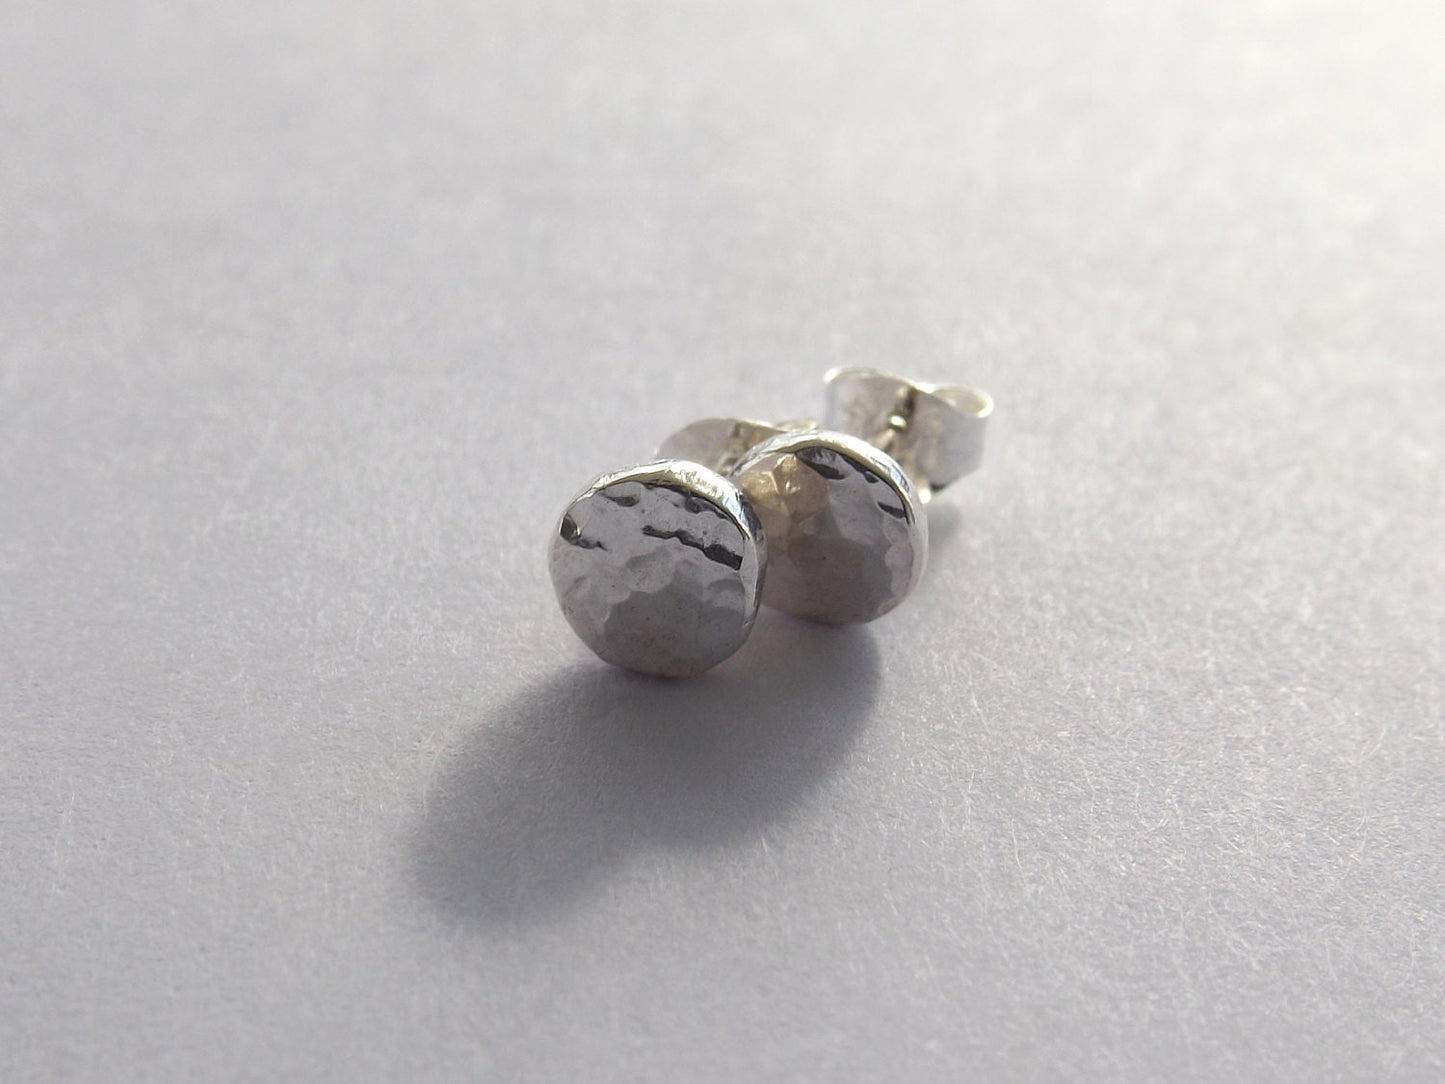 Recycled Silver Circle Earrings, Sterling Earrings, Post Earrings, Faceted Earrings, Disc Earrings, Minimalist Earrings, Post Earrings